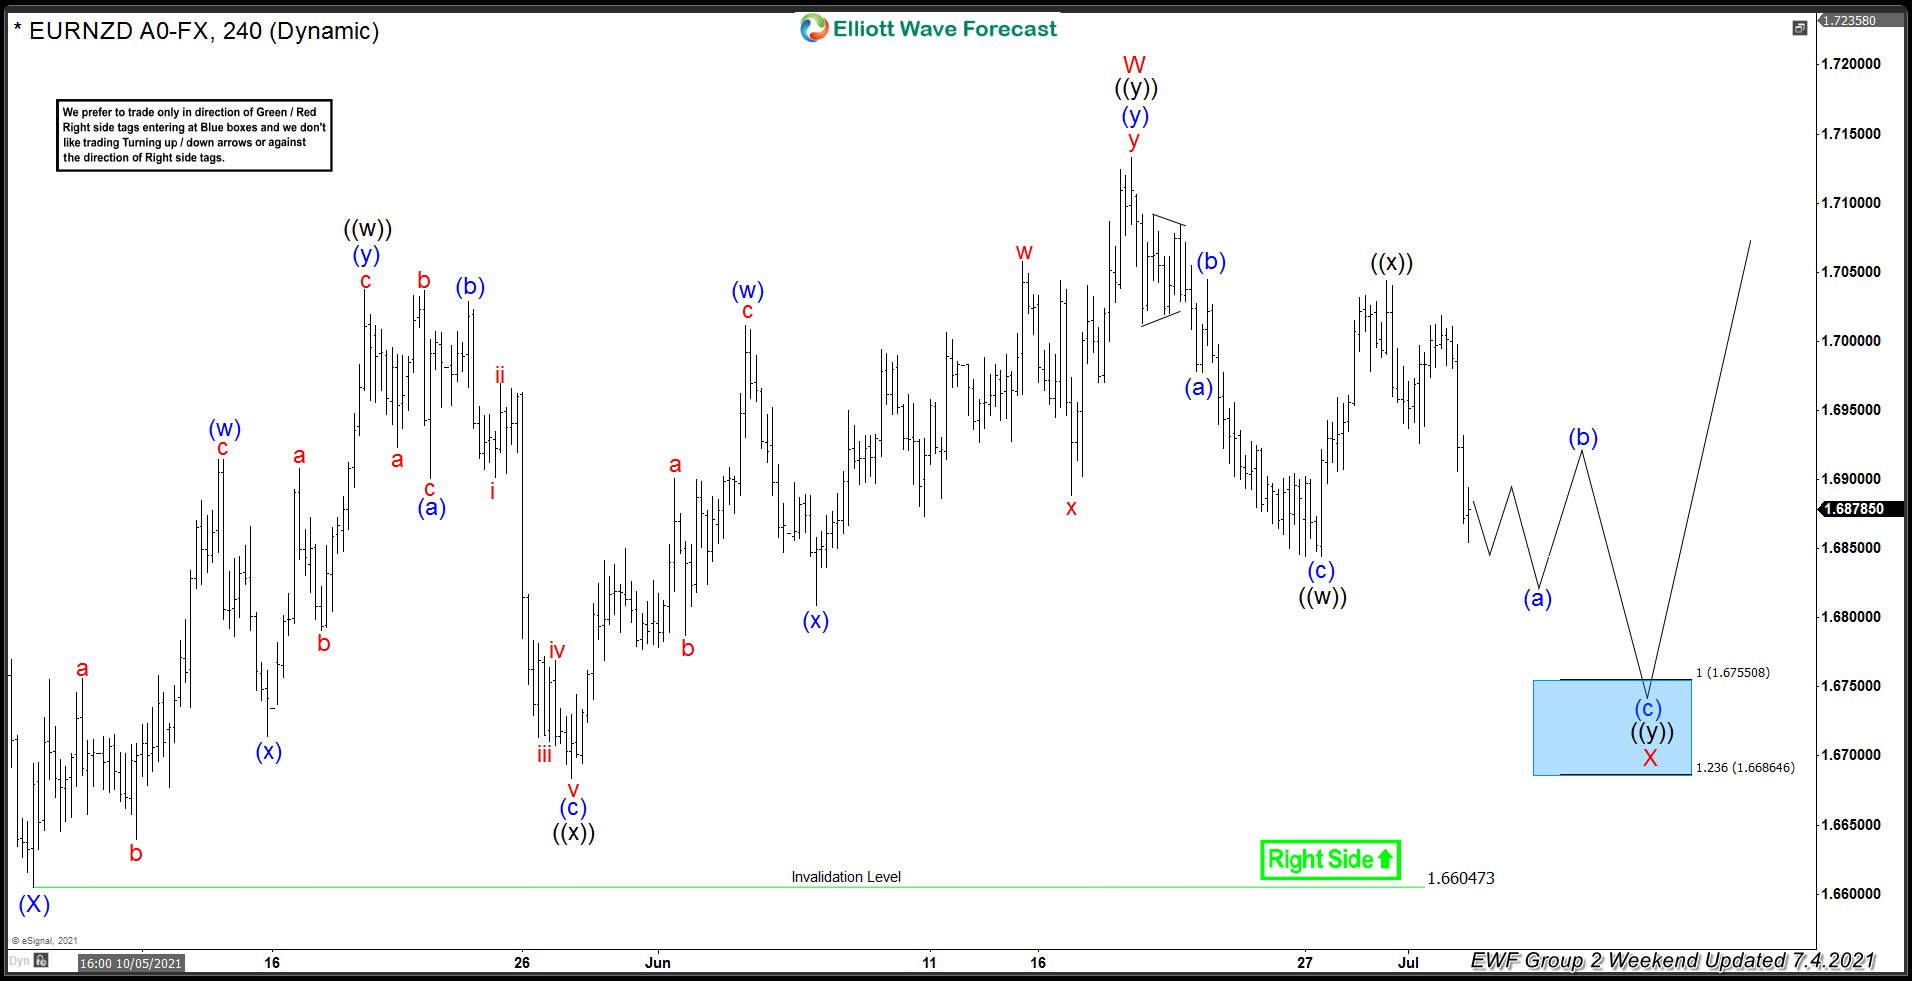 EURNZD Buying The Dips At The Blue Box Area